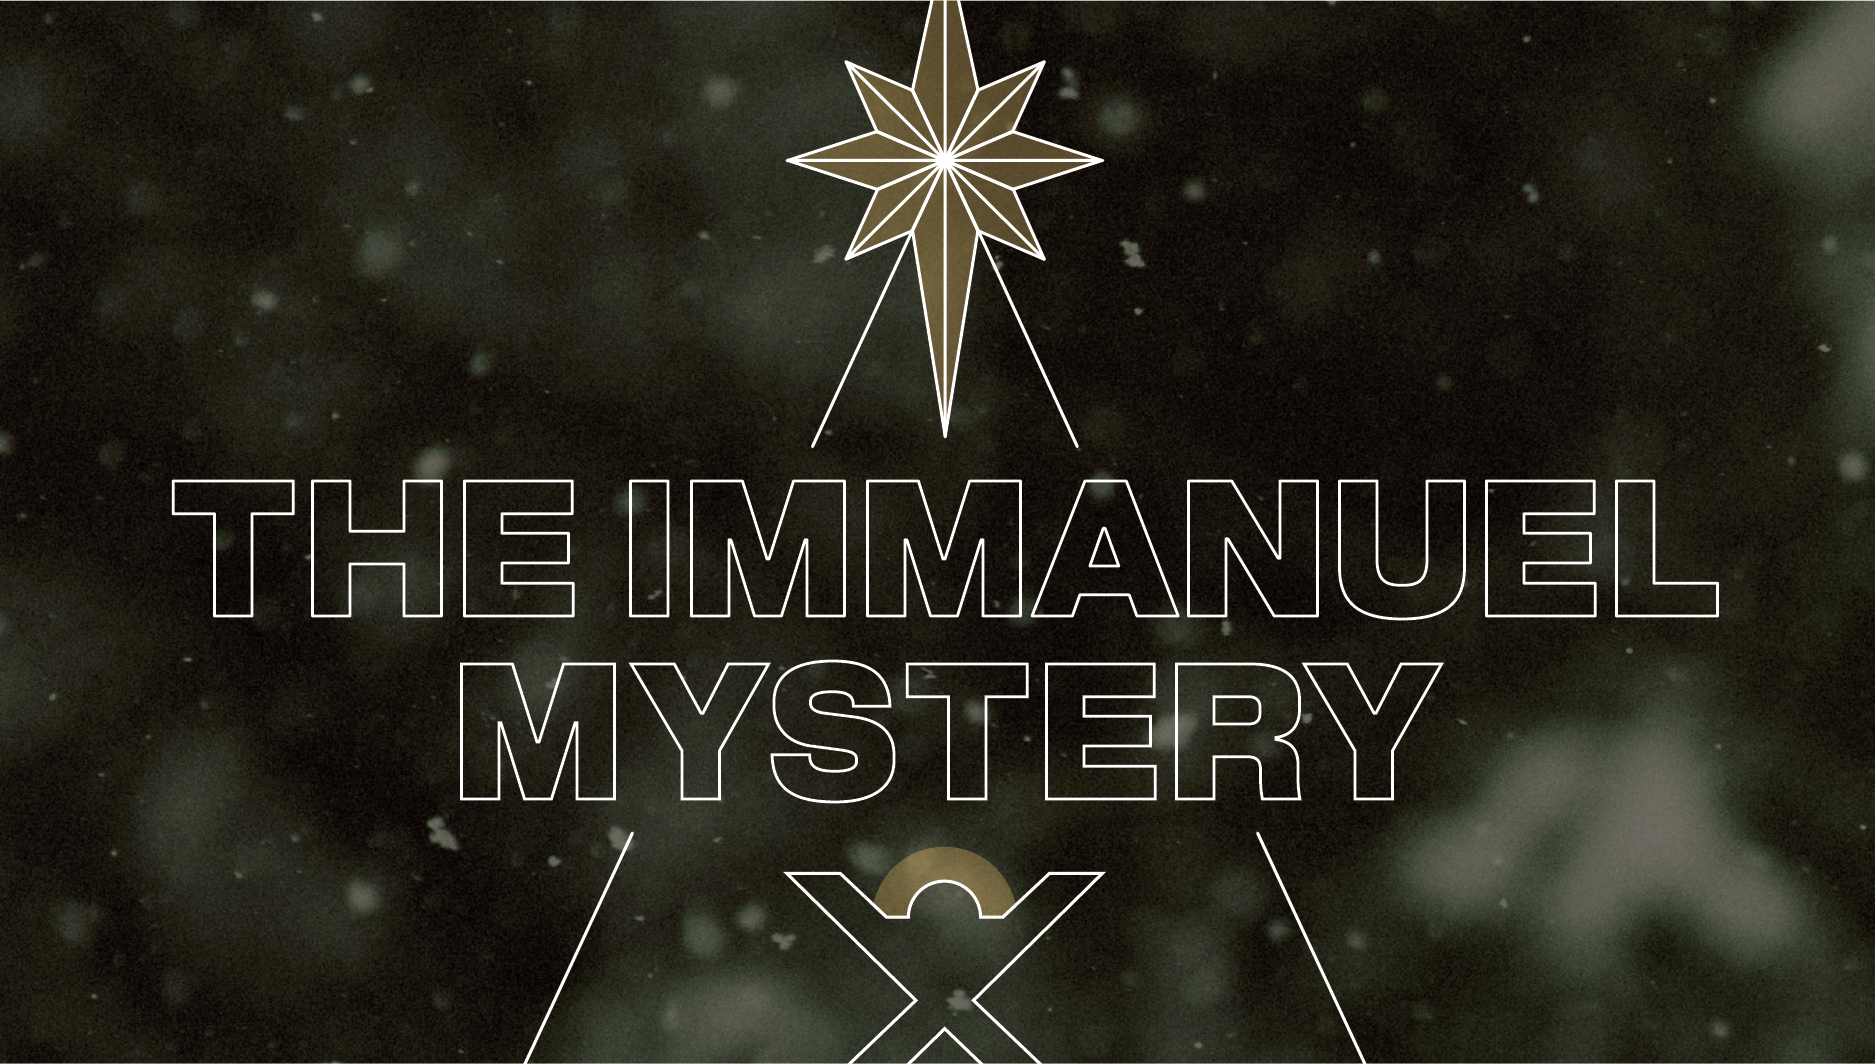 The Immanuel Mystery